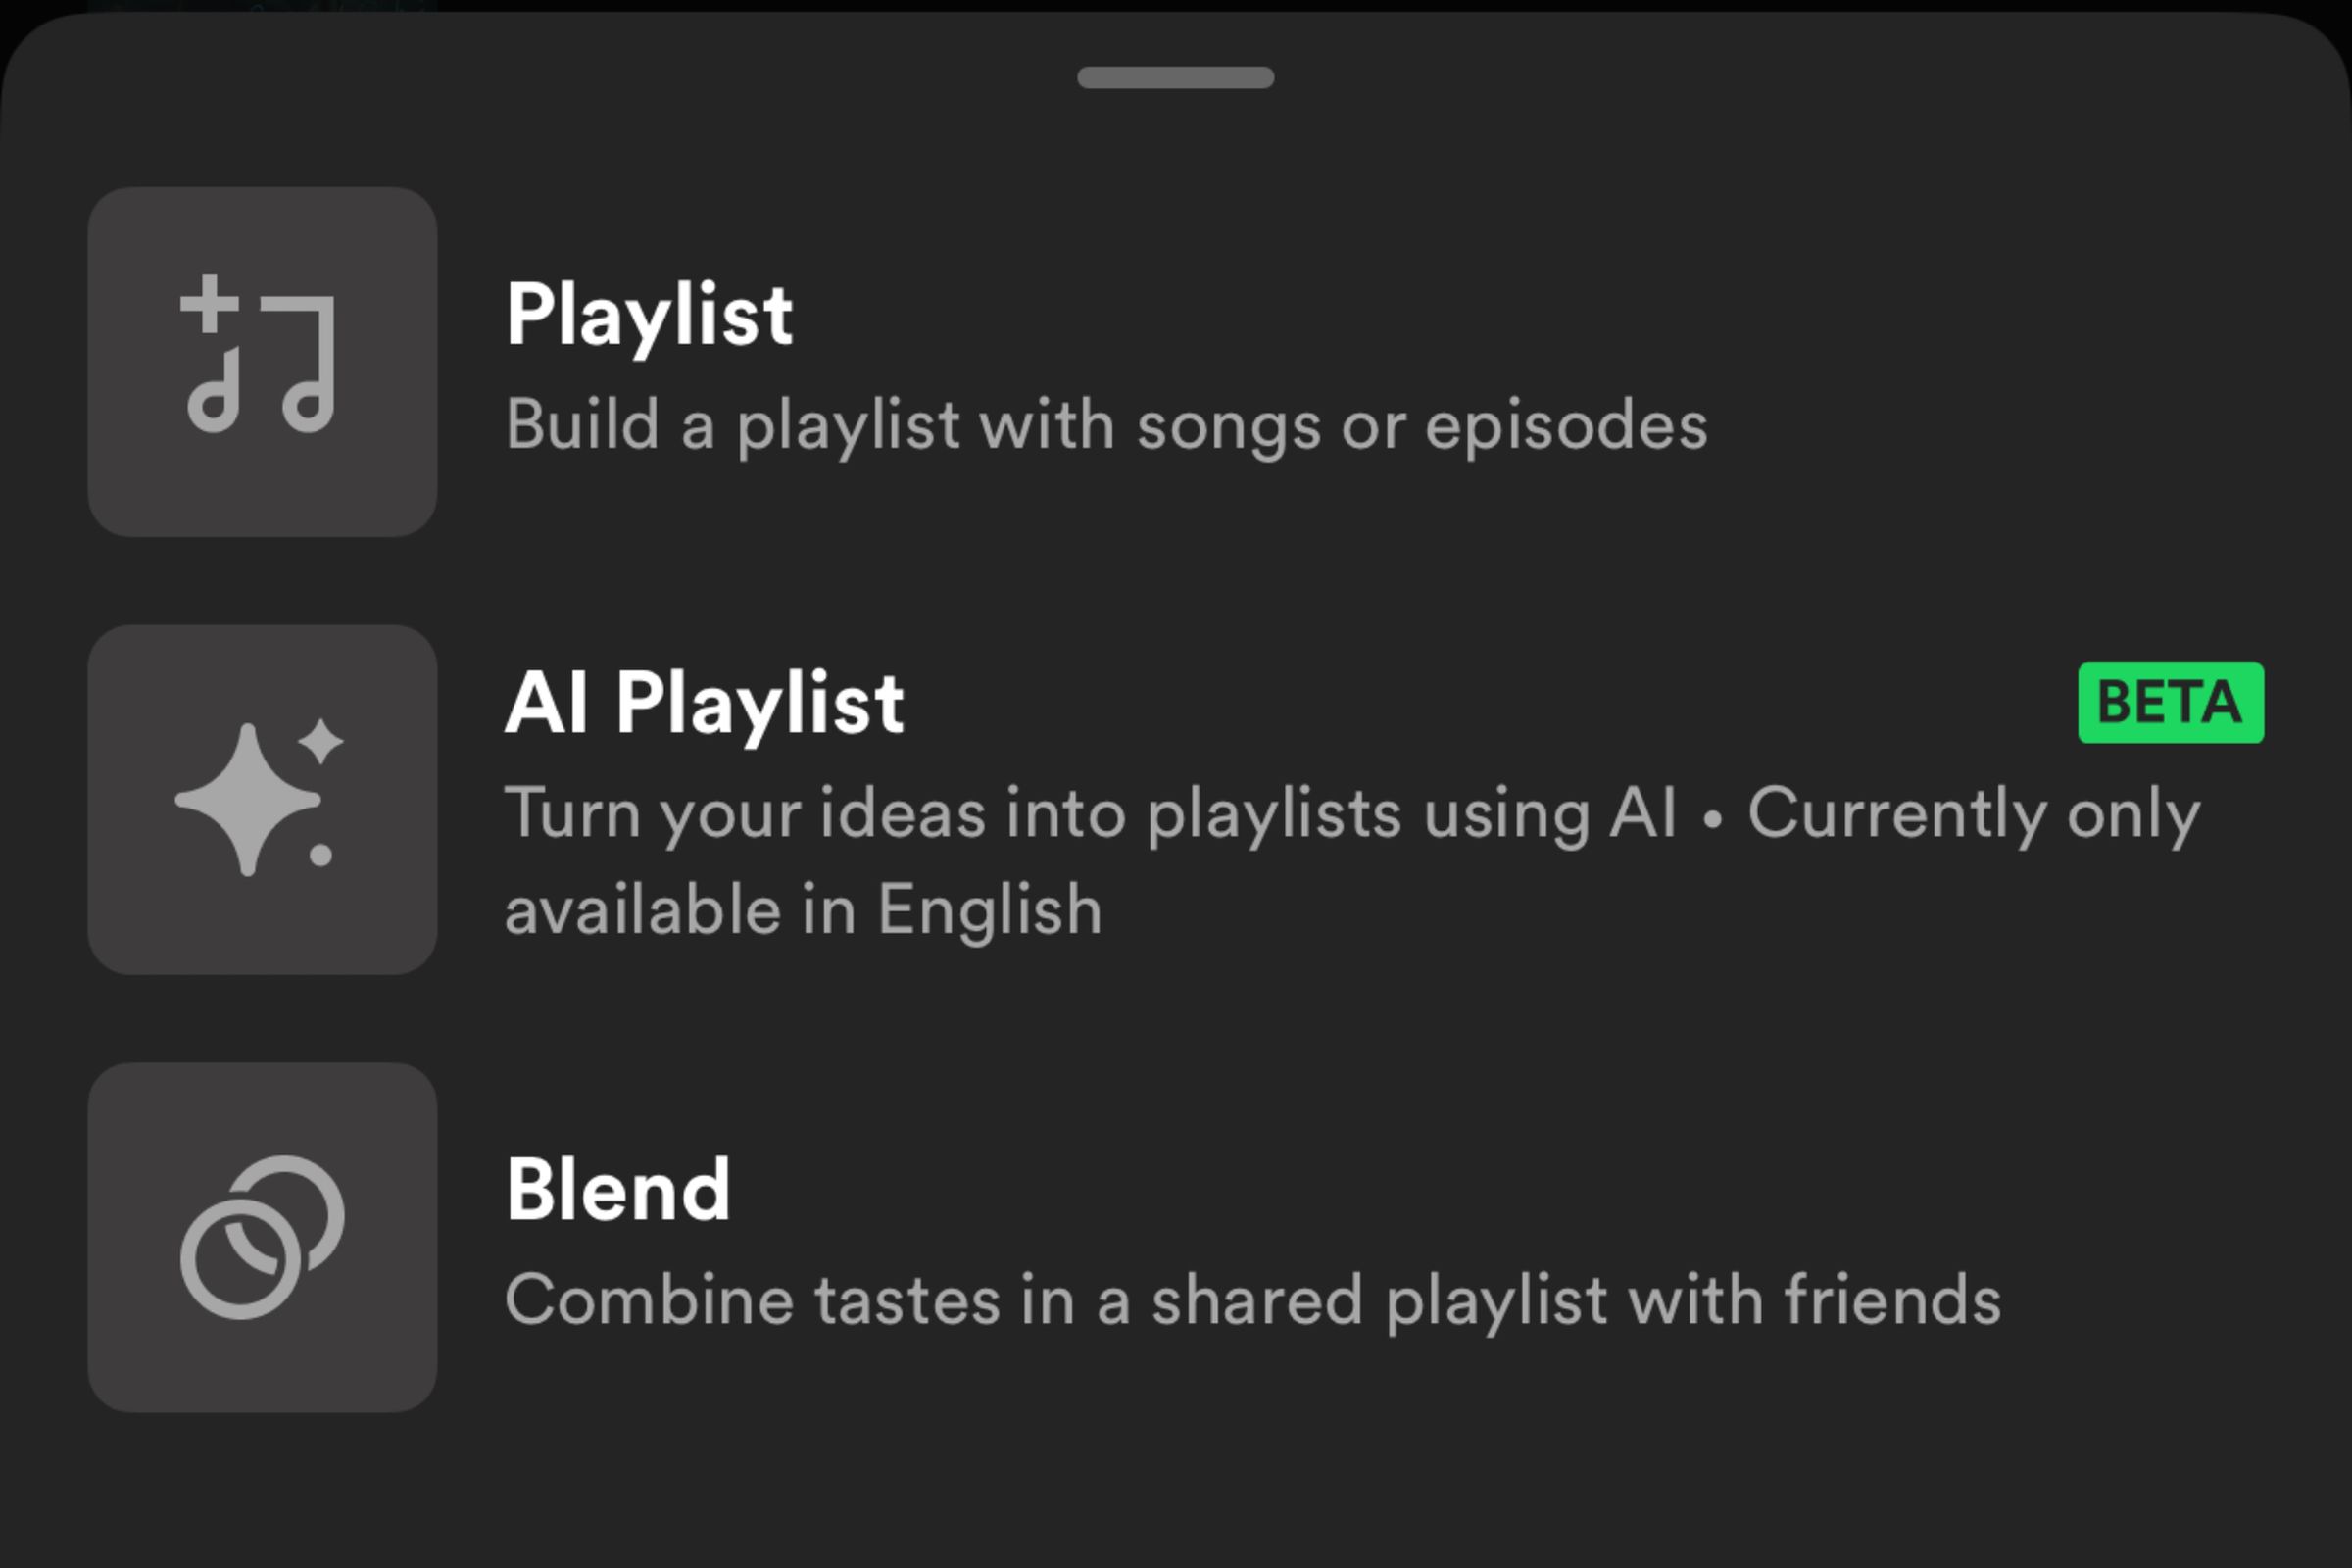 A screenshot taken of the new Spotify AI Playlist feature in the iOS app.